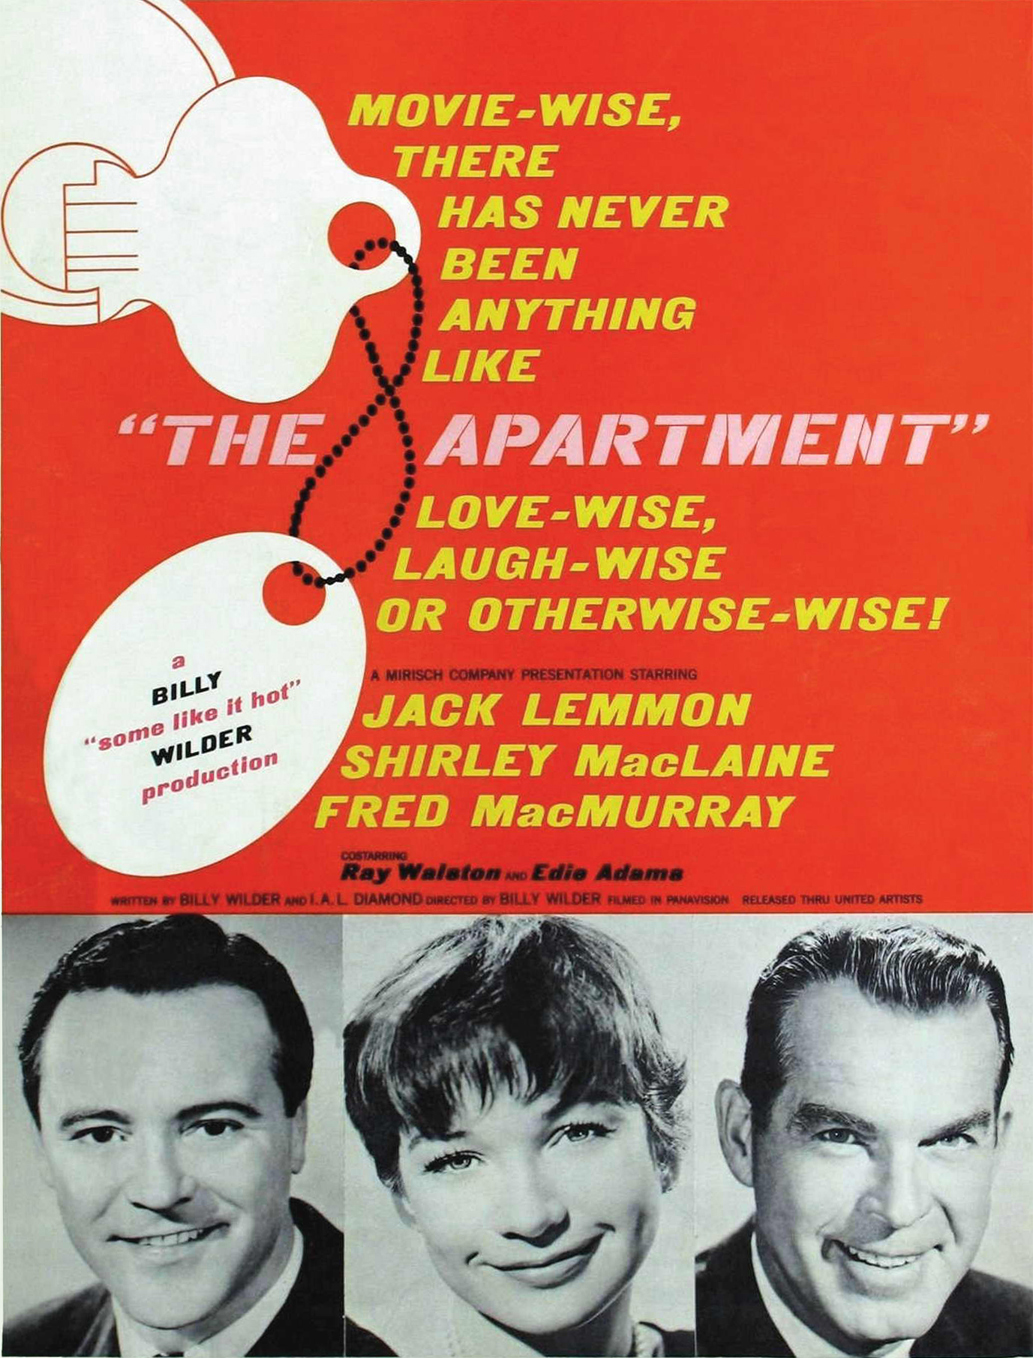 the-apartment-poster-caption-free.jpg